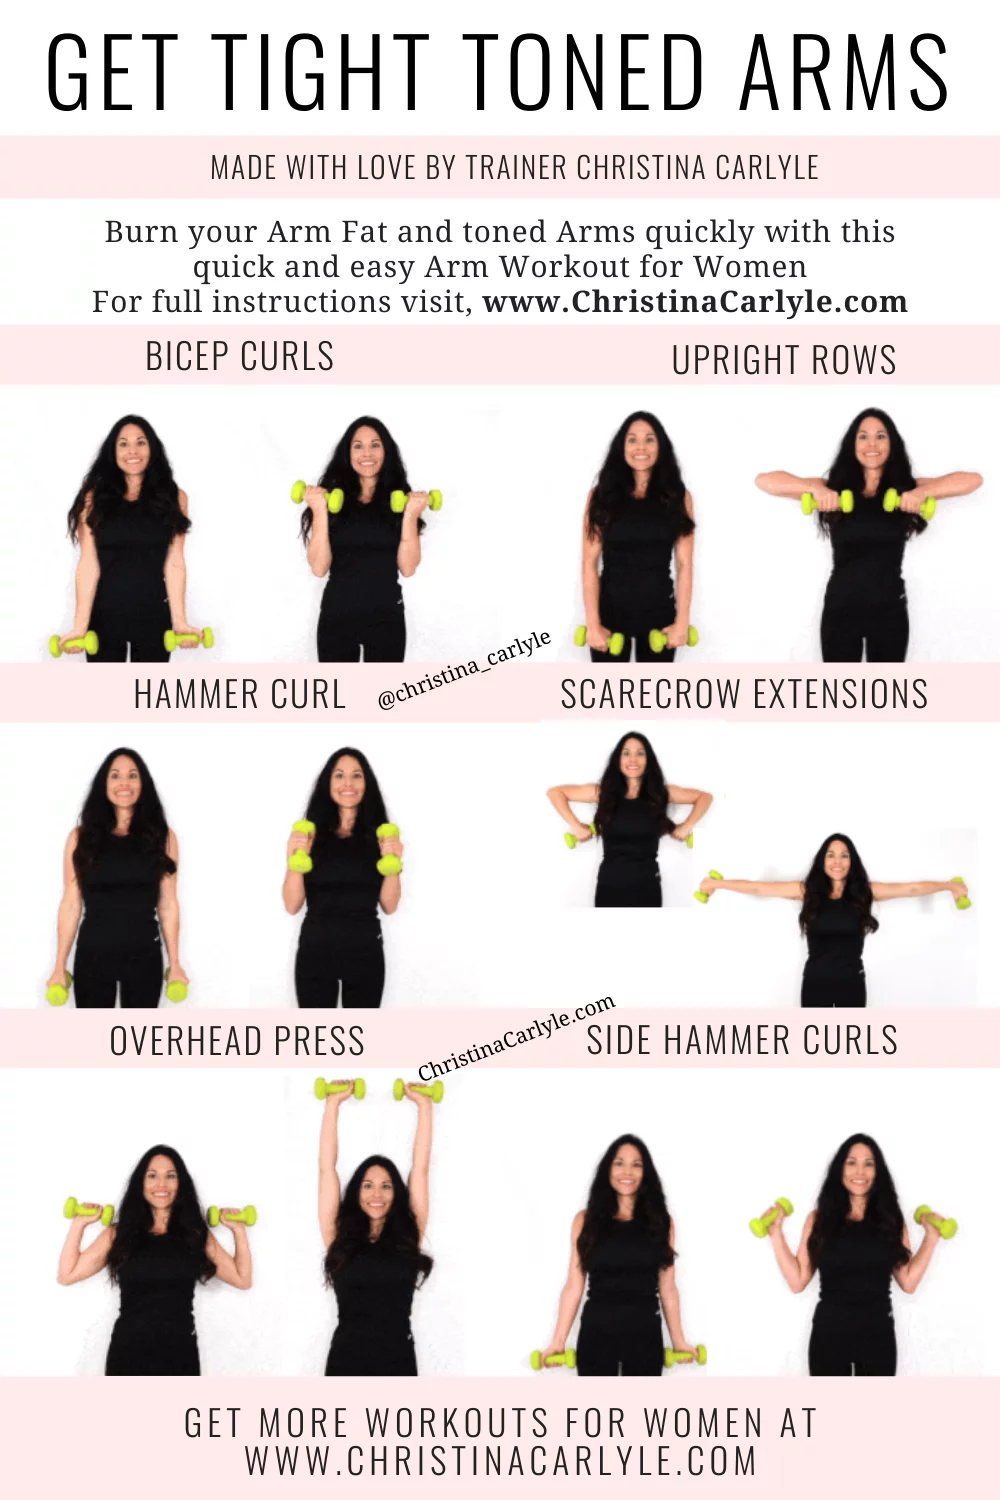 https://www.christinacarlyle.com/wp-content/uploads/2017/10/Arm-workout-for-women.png